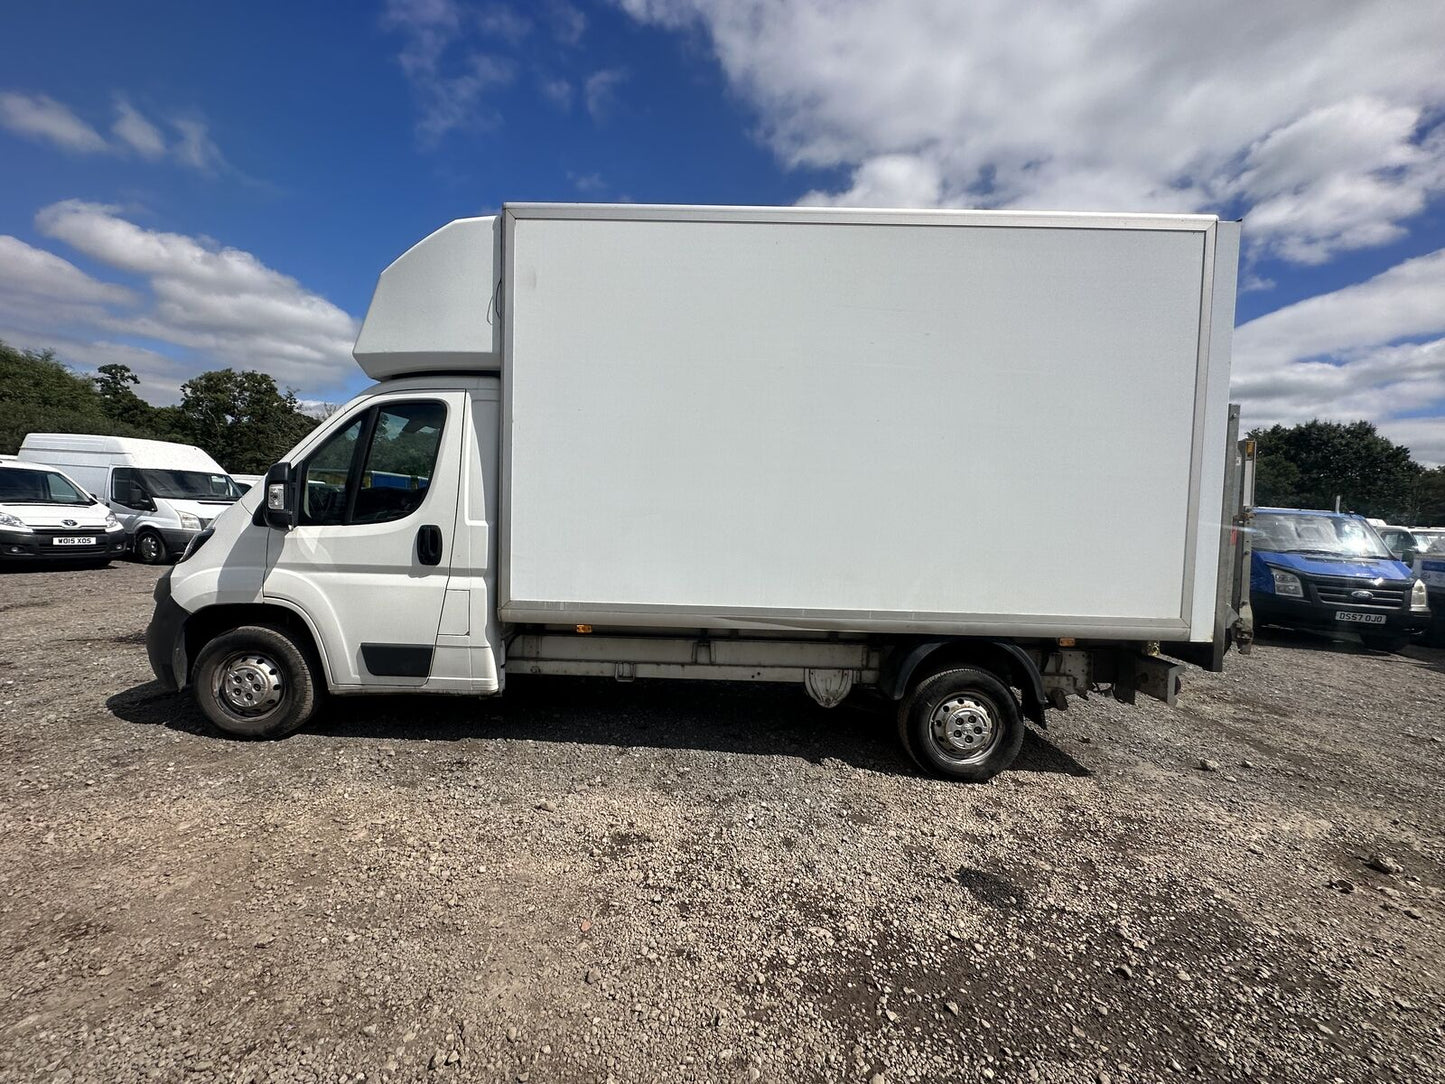 Bid on WHITE LUTON BOX WITH TAIL LIFT - 2017 WITH 100K MILES ON THE CLOCK- Buy &amp; Sell on Auction with EAMA Group